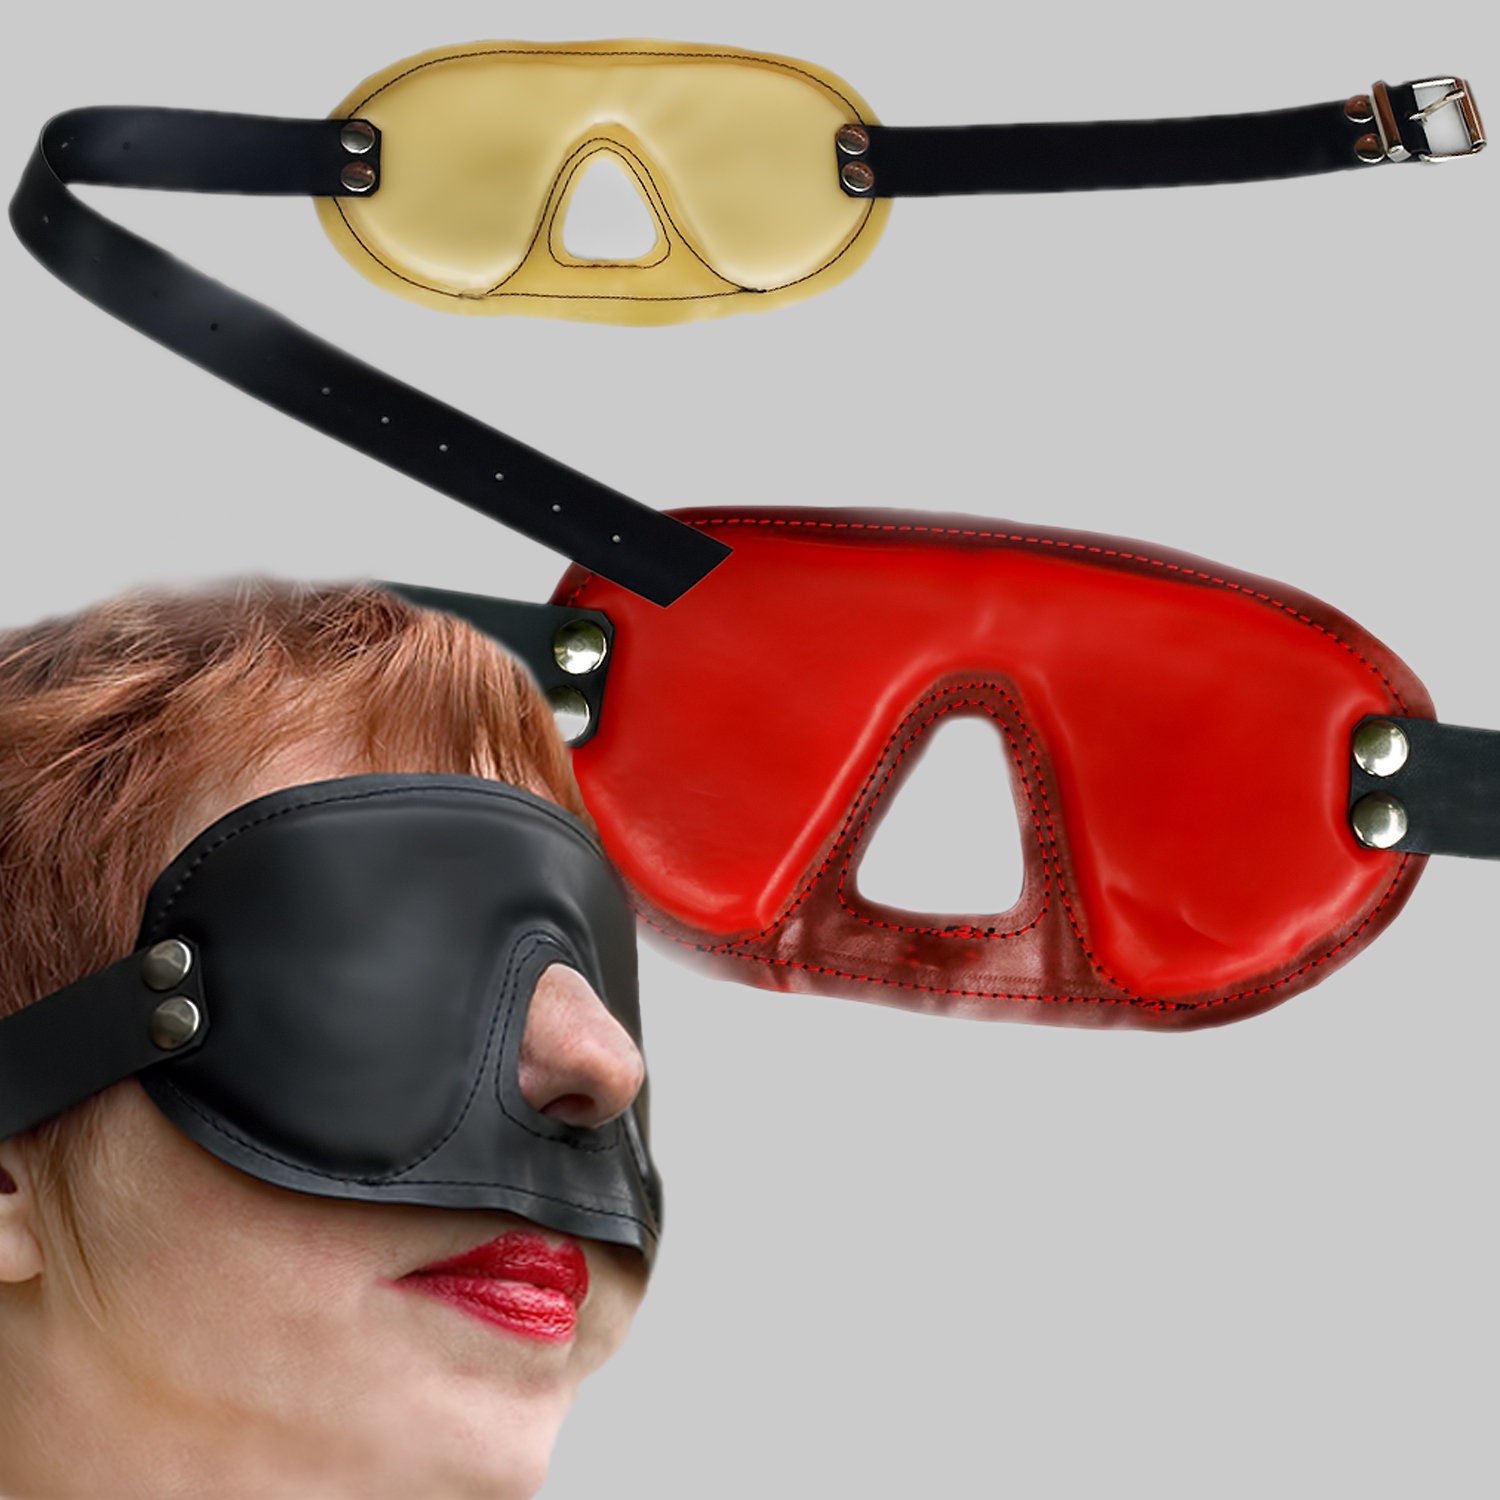 Blindfolds, Gags, and Safe Words